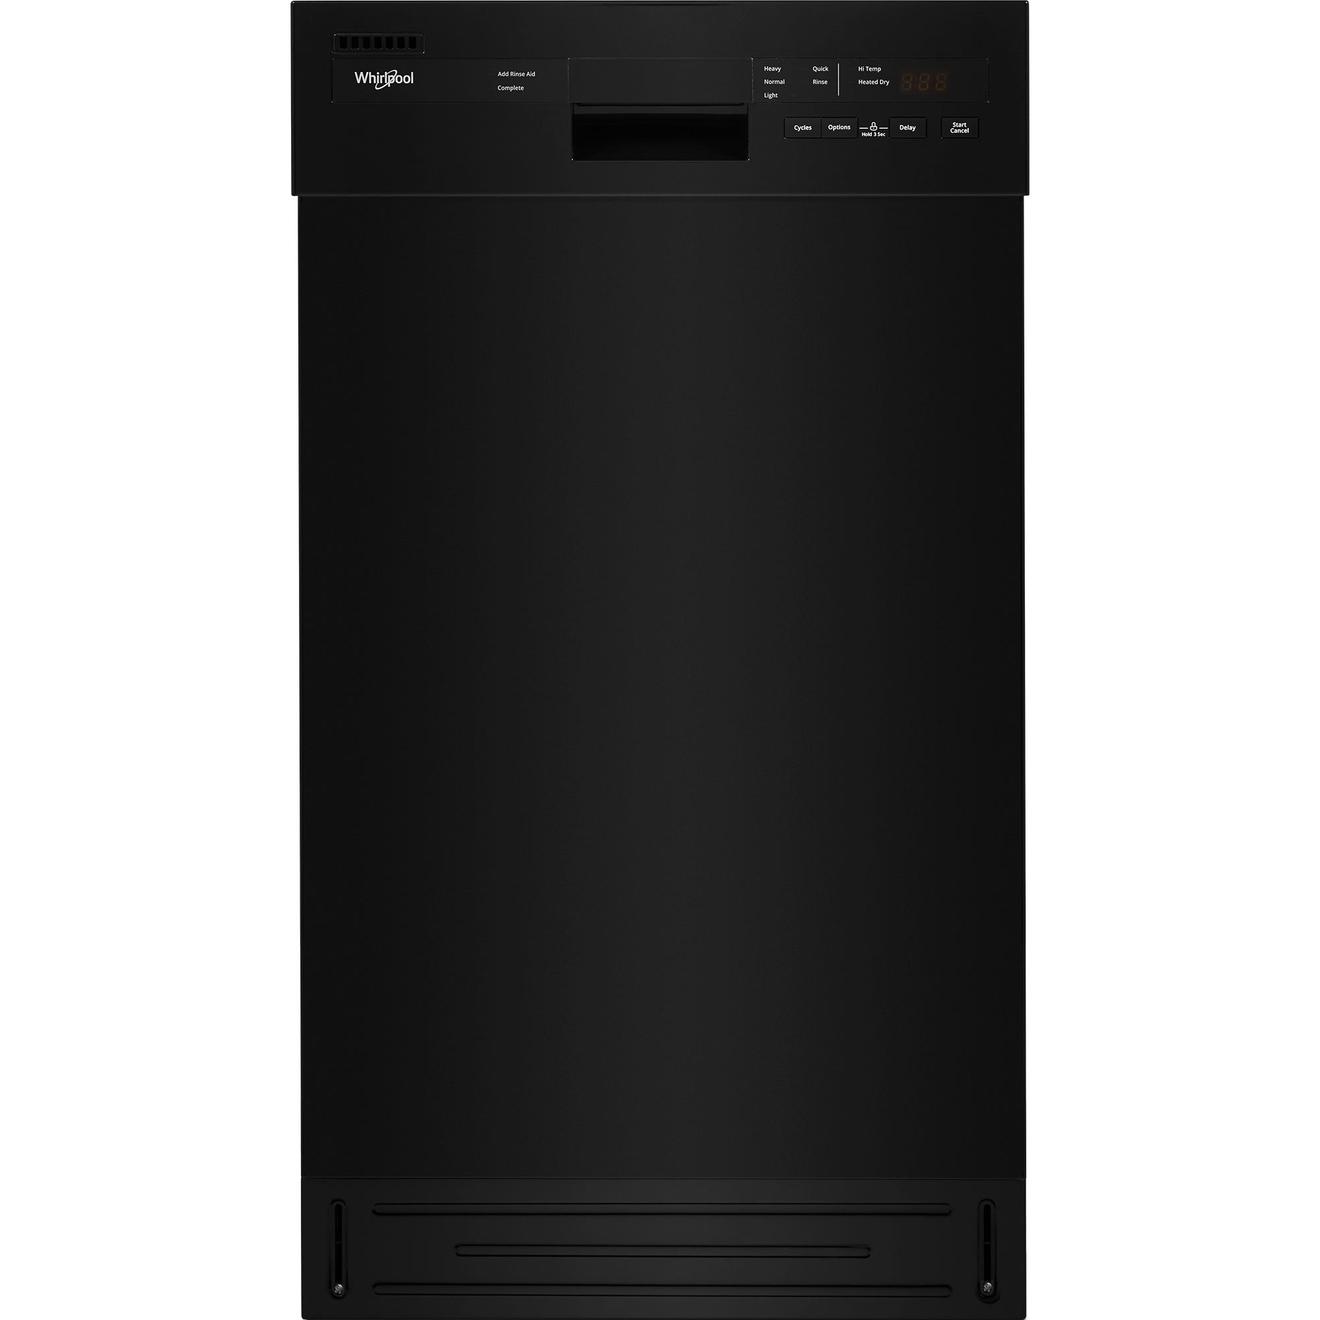 Whirlpool 5 Cycle Dishwasher with Front Controls offers at $1049.98 in Trail Appliances